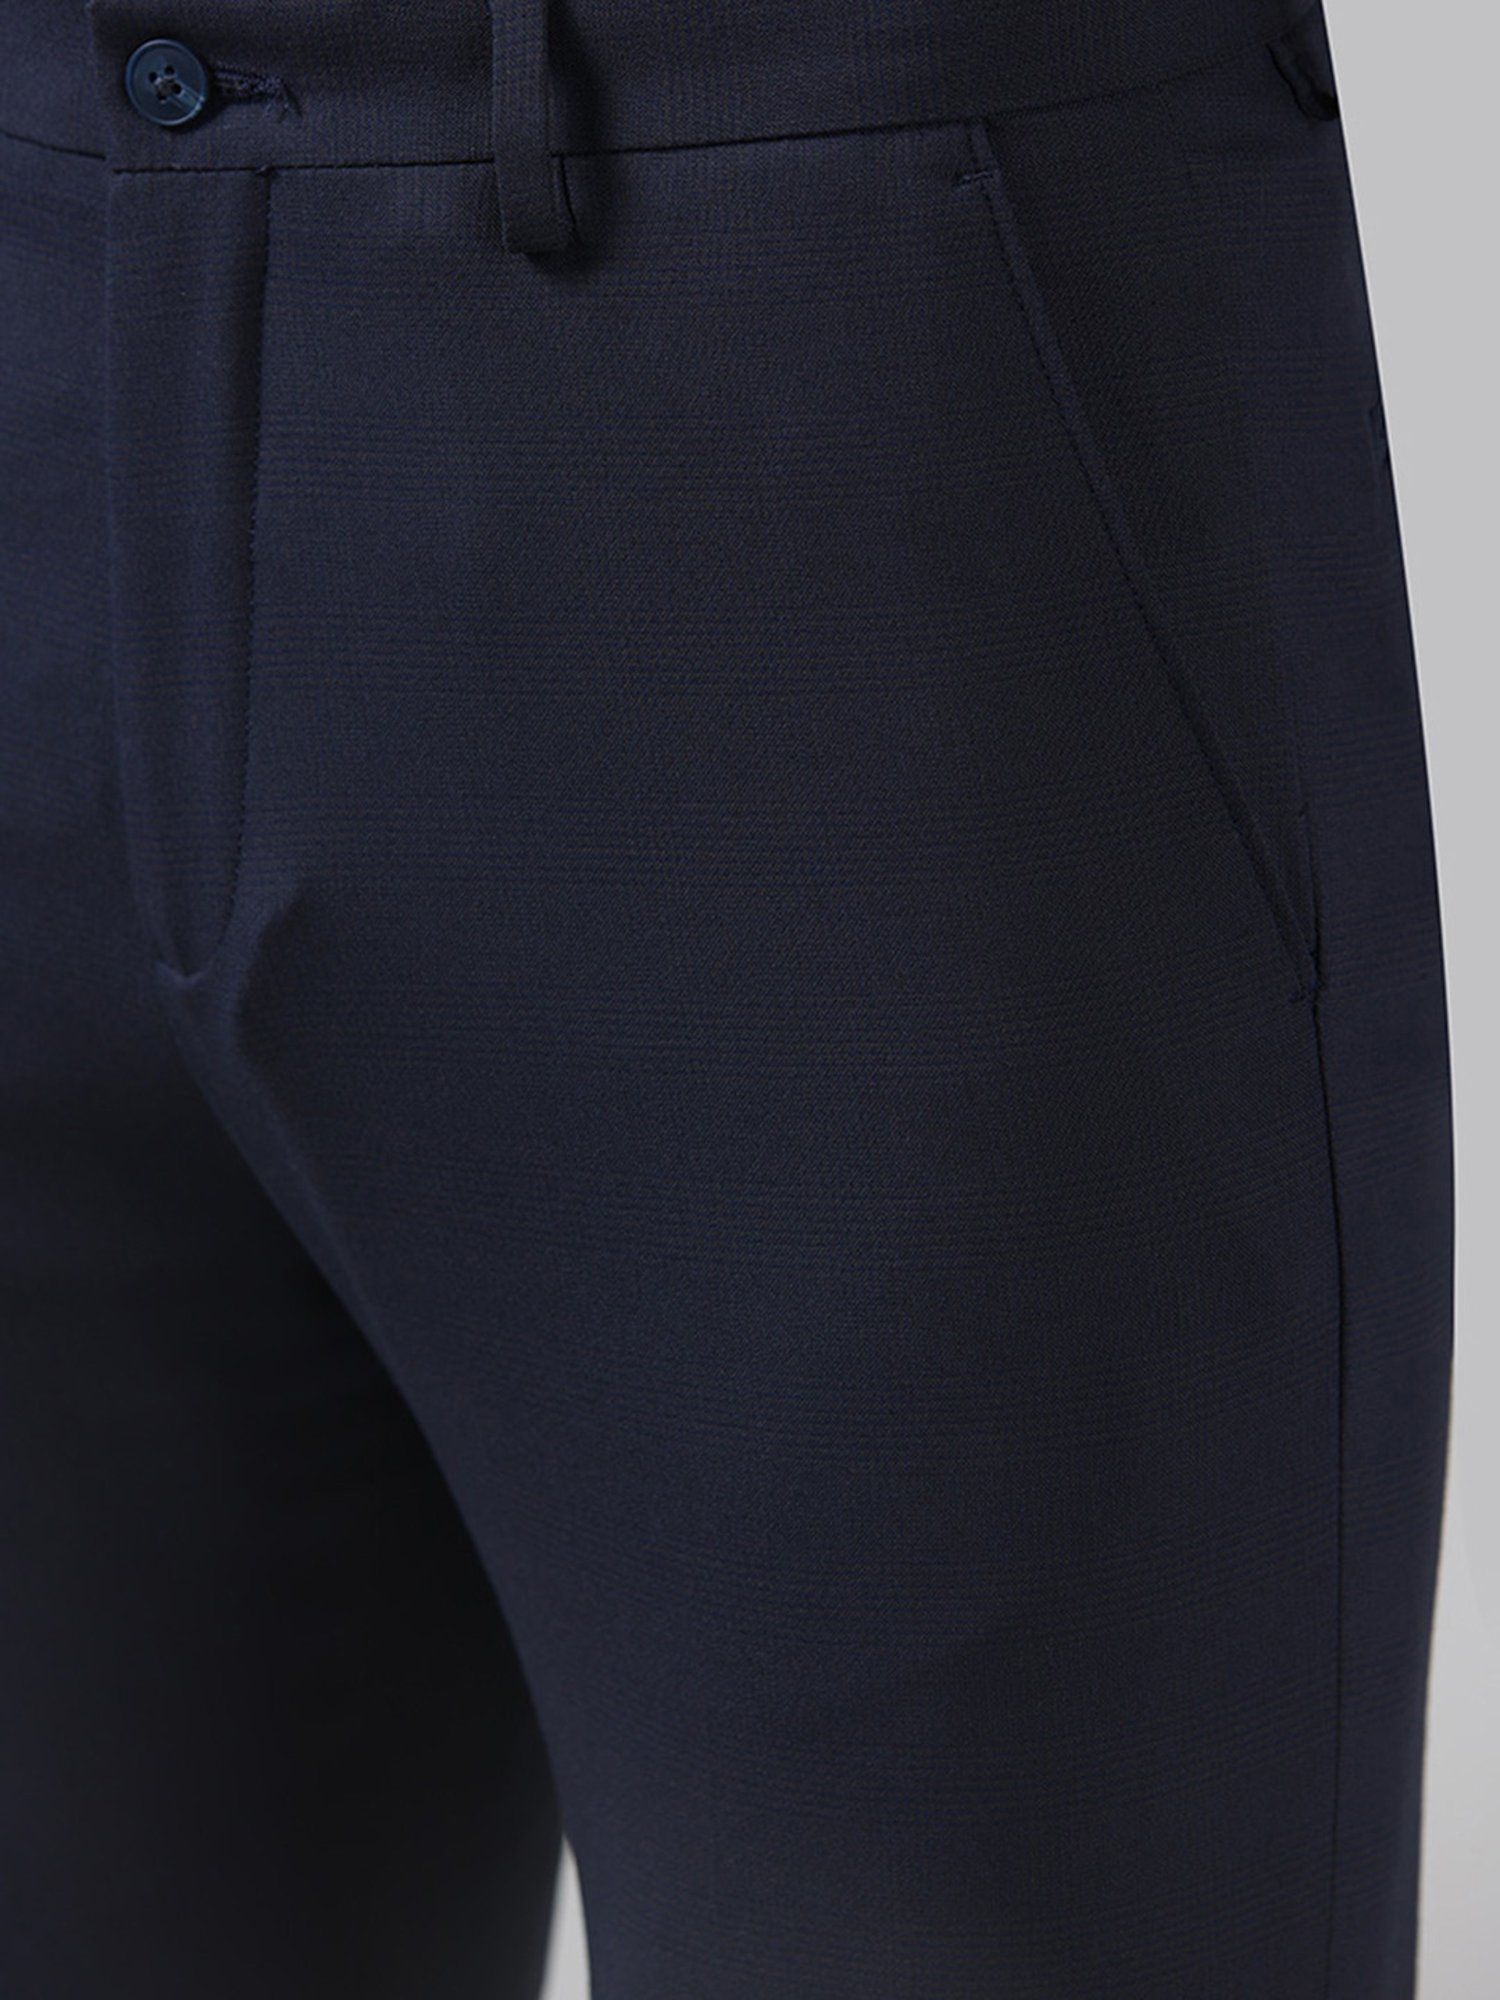 Buy WES Formals Solid Navy Carrot Fit Trousers from Westside